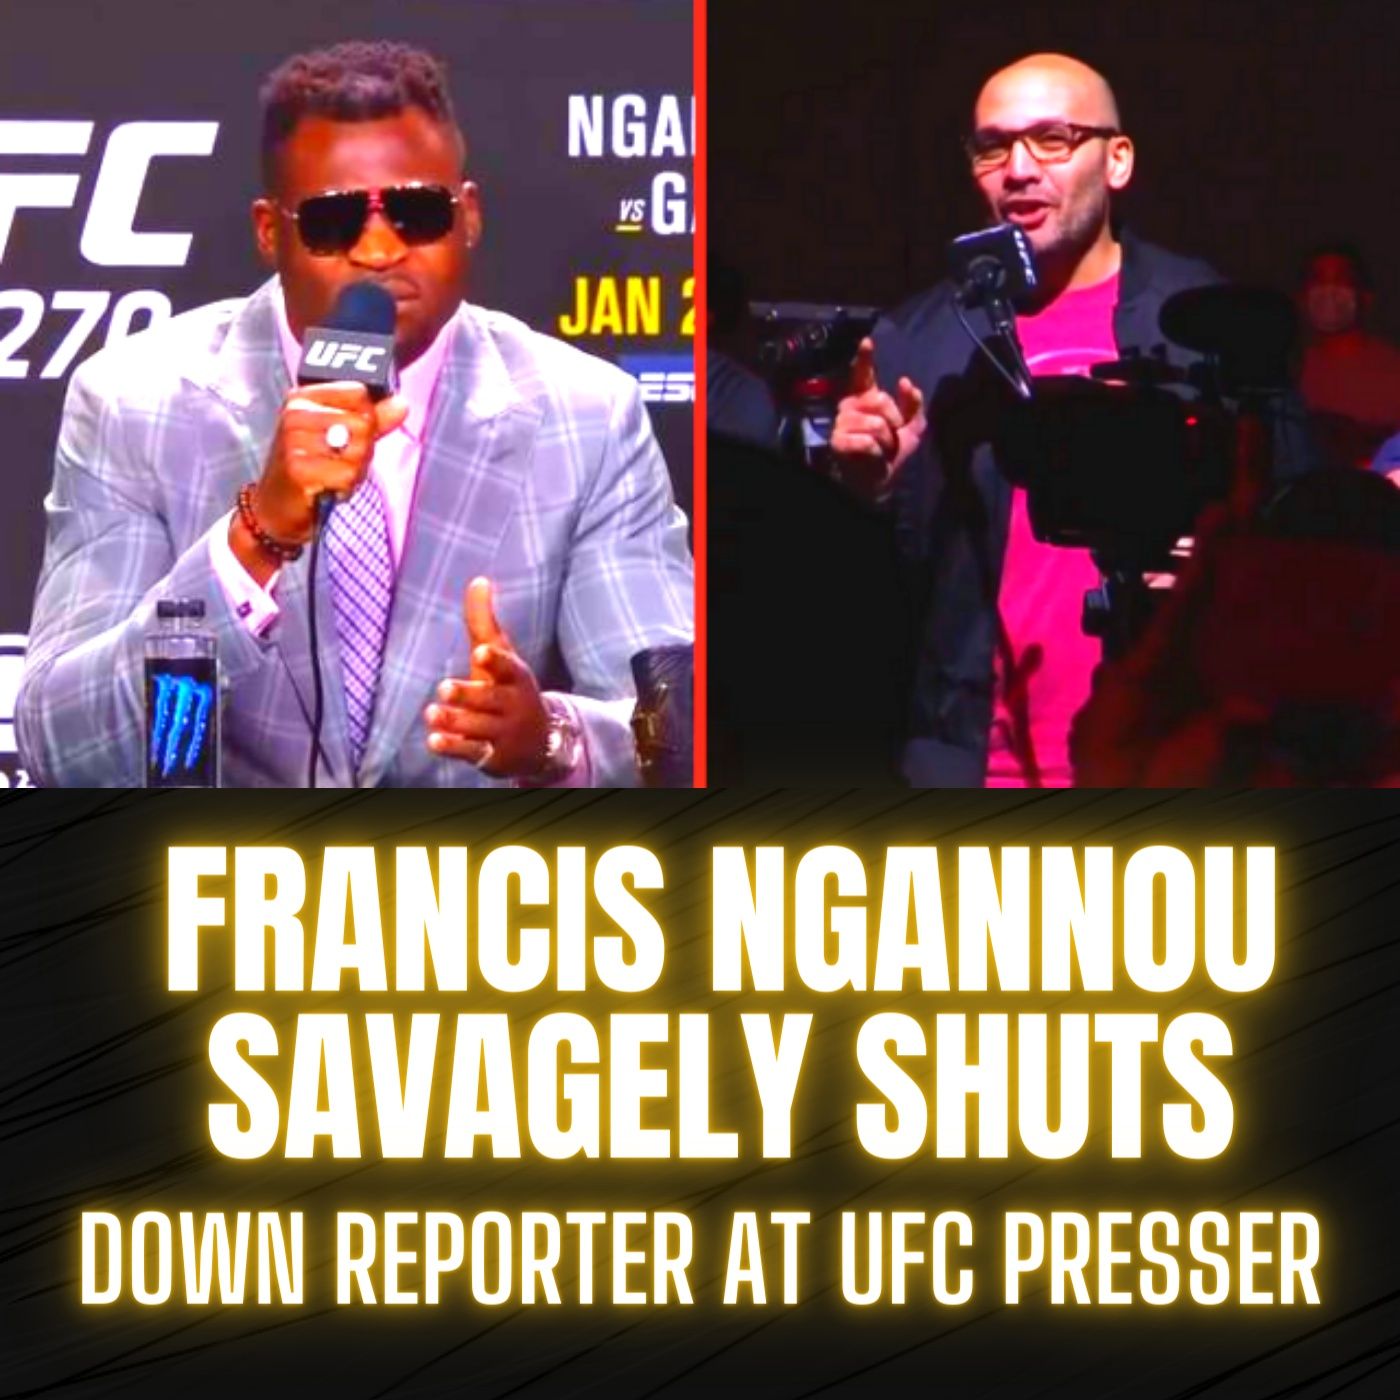 Francis Ngannou Savagely Shuts Down Reporter At UFC Presser